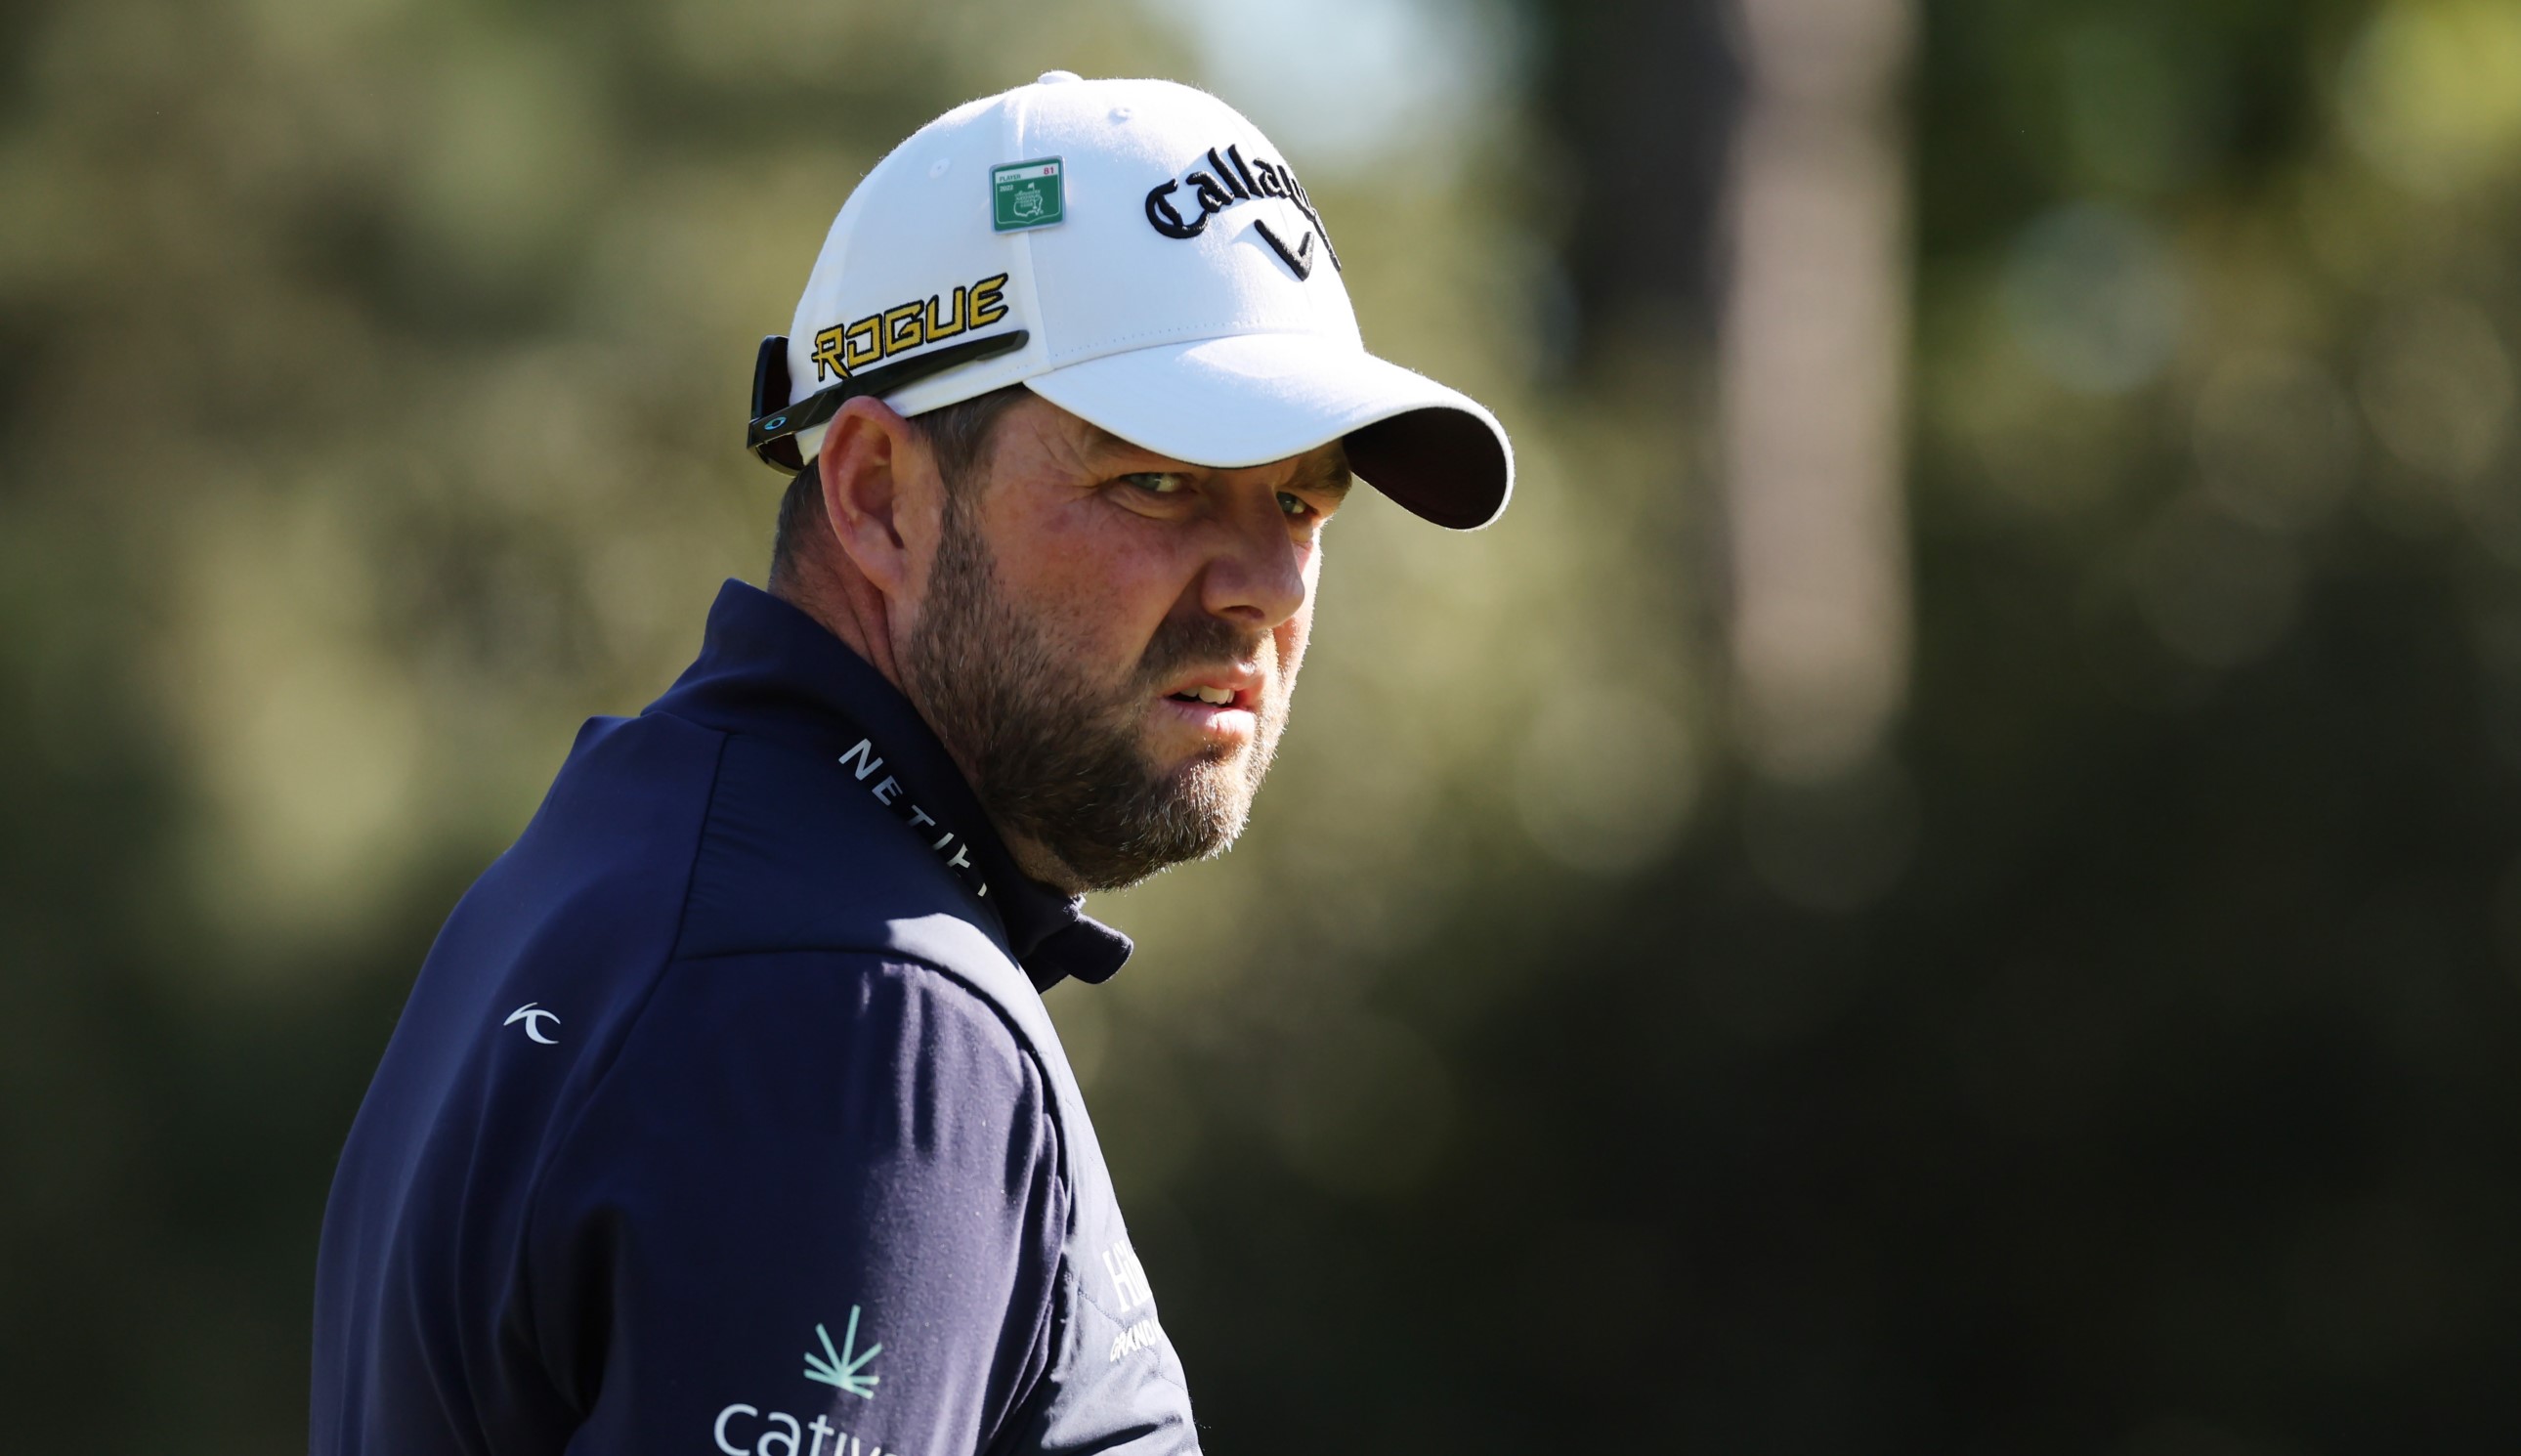 Leishman stares on with a hat on